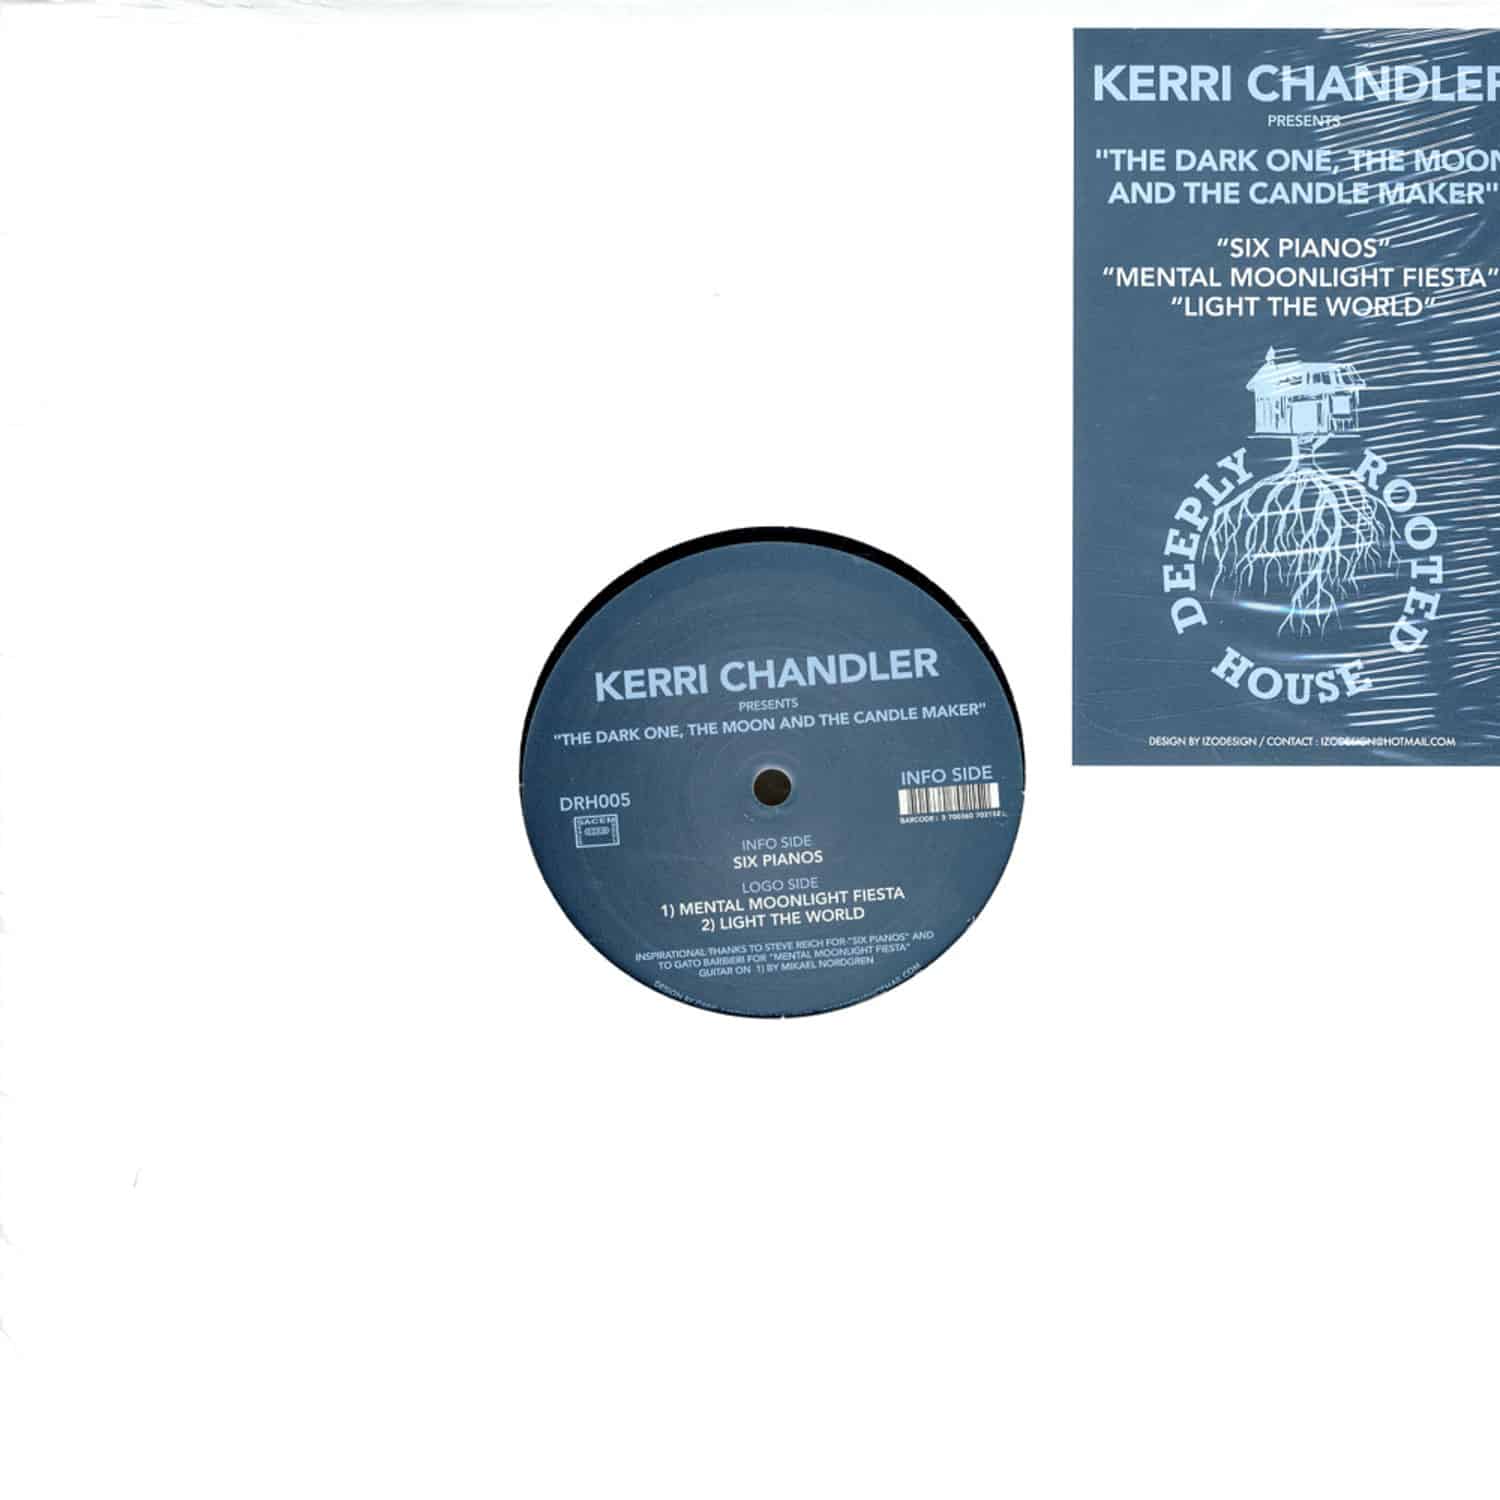 Kerri Chandler - THE DARK ONE, THE MOON AND THE CANDLE MAKER